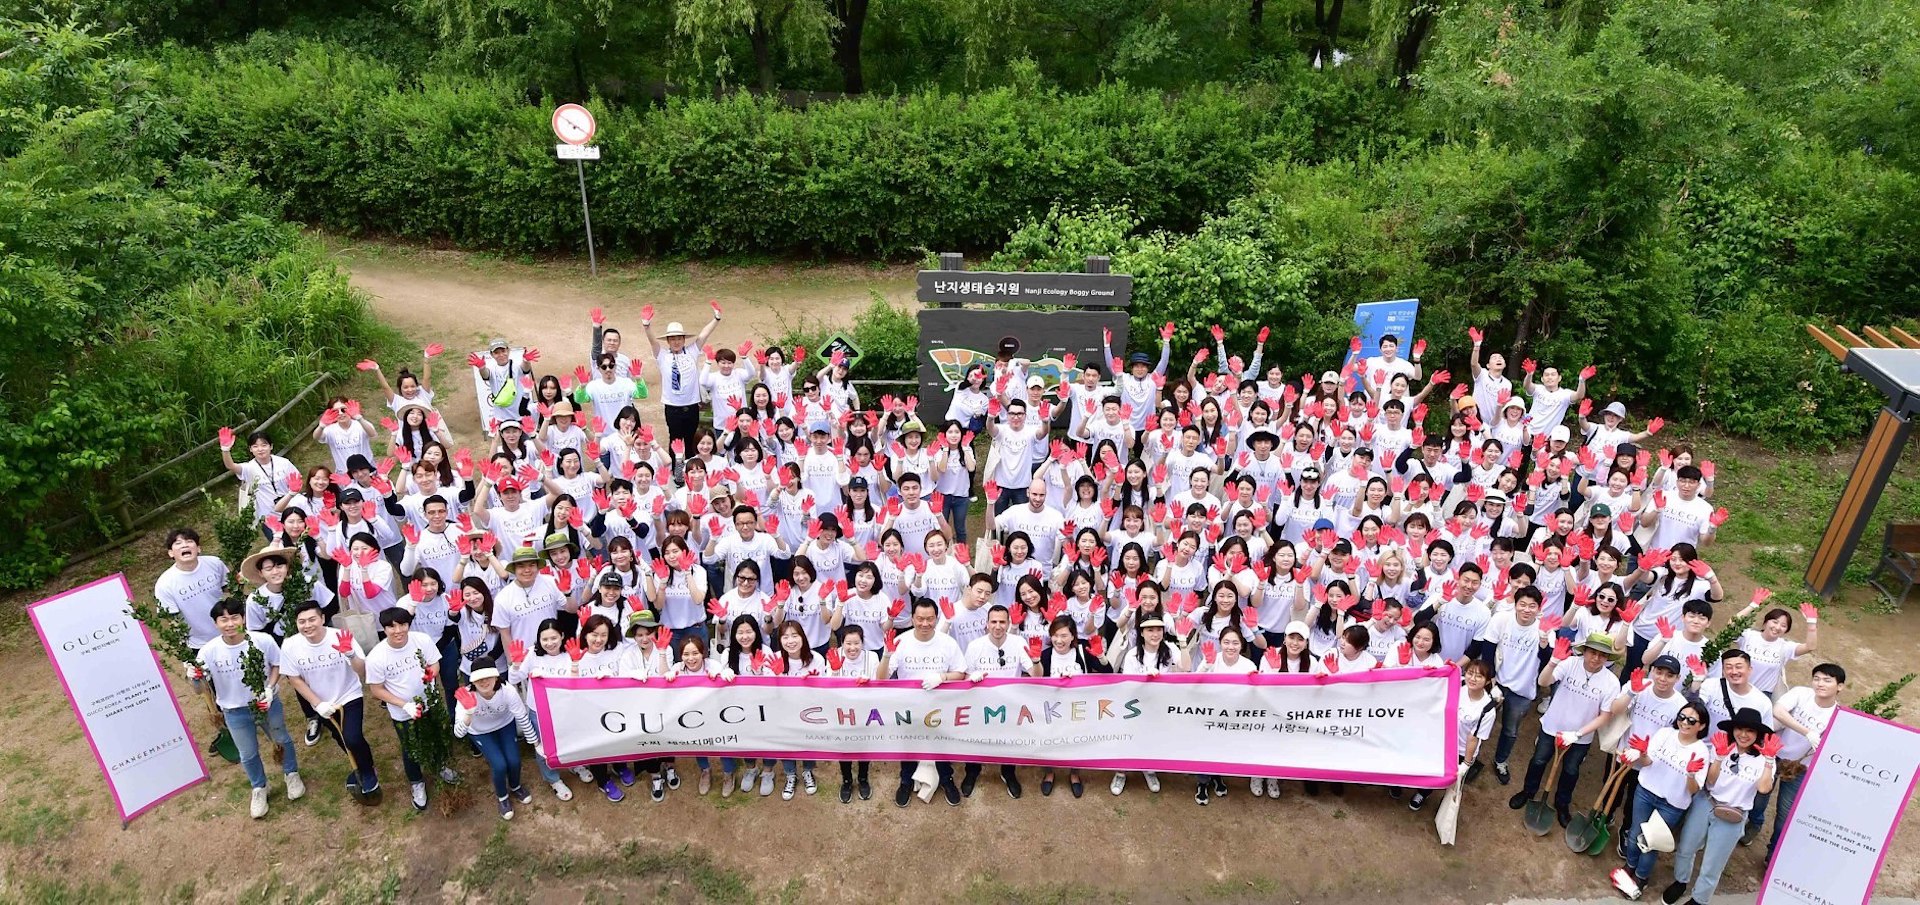 A large group of people wearing white shirts and red gloves photographed from above, look into and wave at the camera, holding a sign that says “Gucci Changemakers, plant a tree, share the love”. They stand on a dirt path in front of leafy green bushes and trees.
